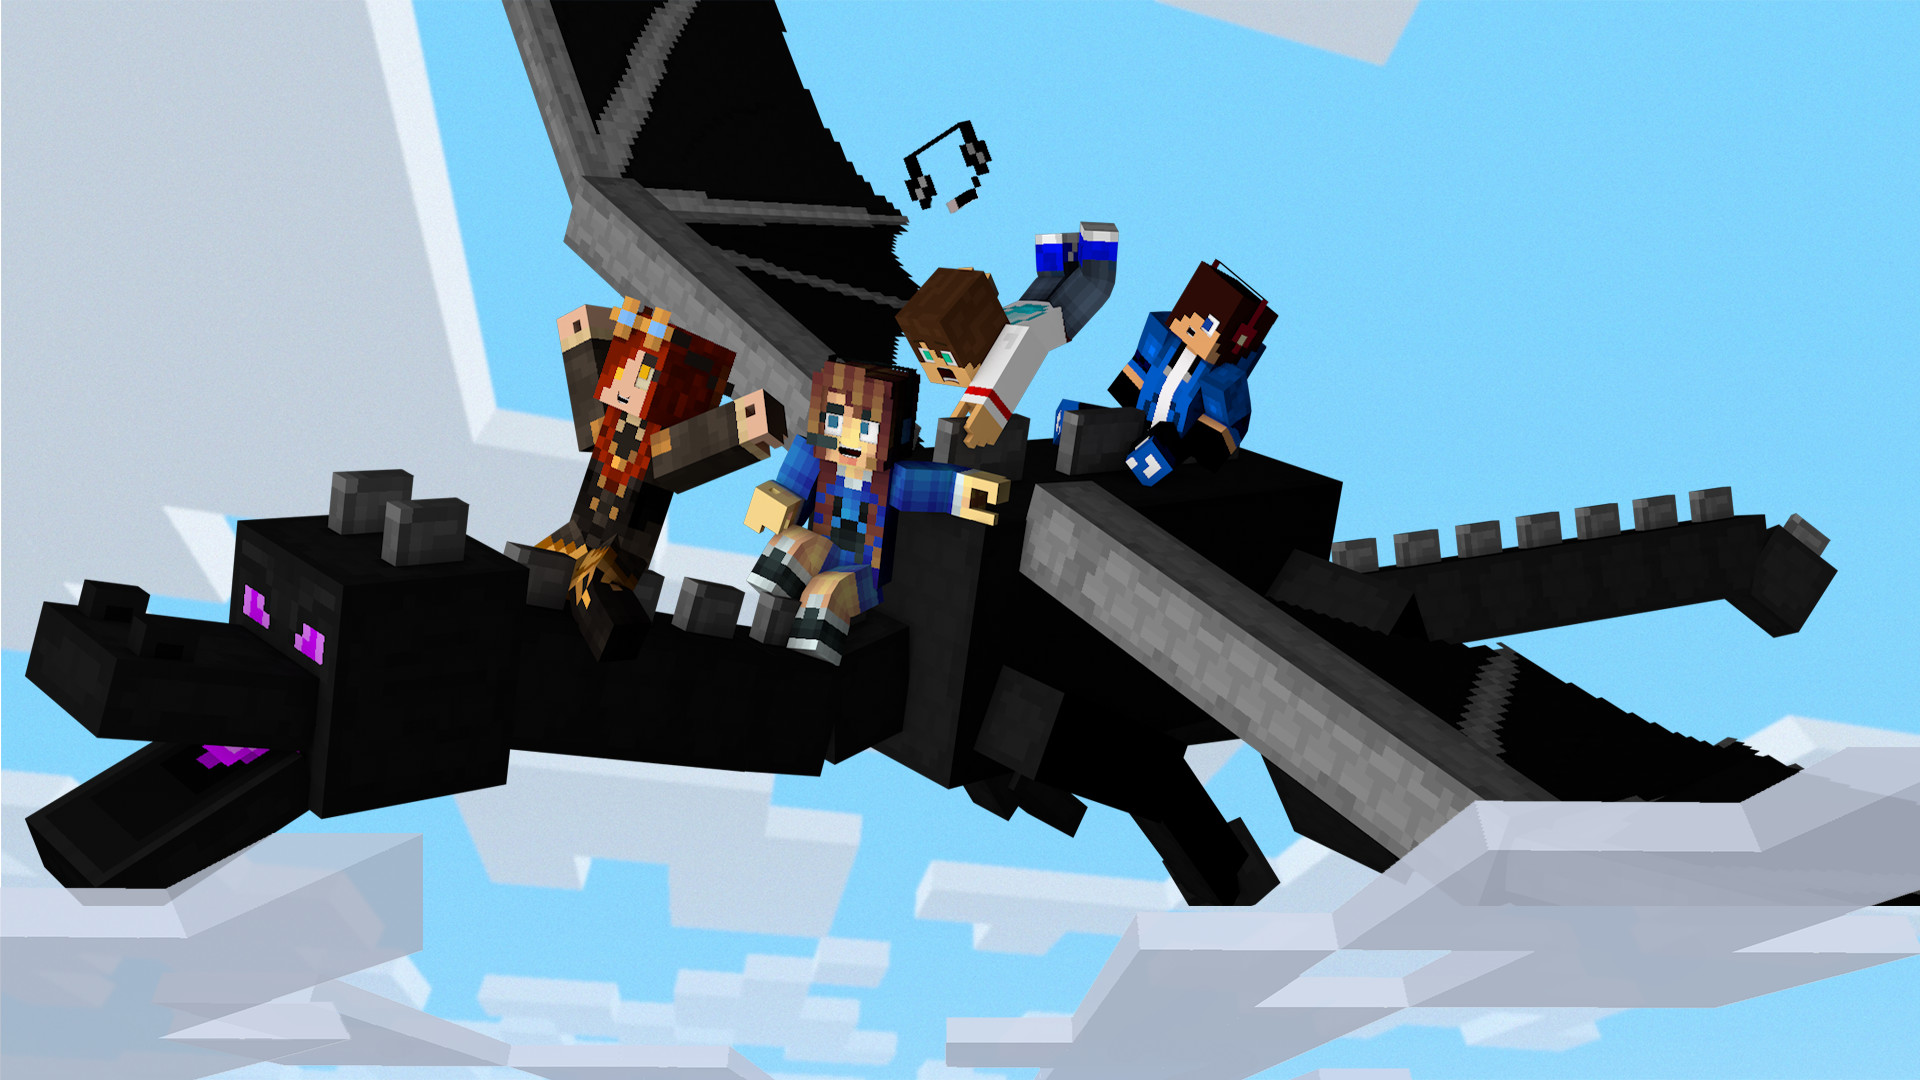 1920x1080 Ender Dragon Ride by brodielawrence Ender Dragon Ride by brodielawrence